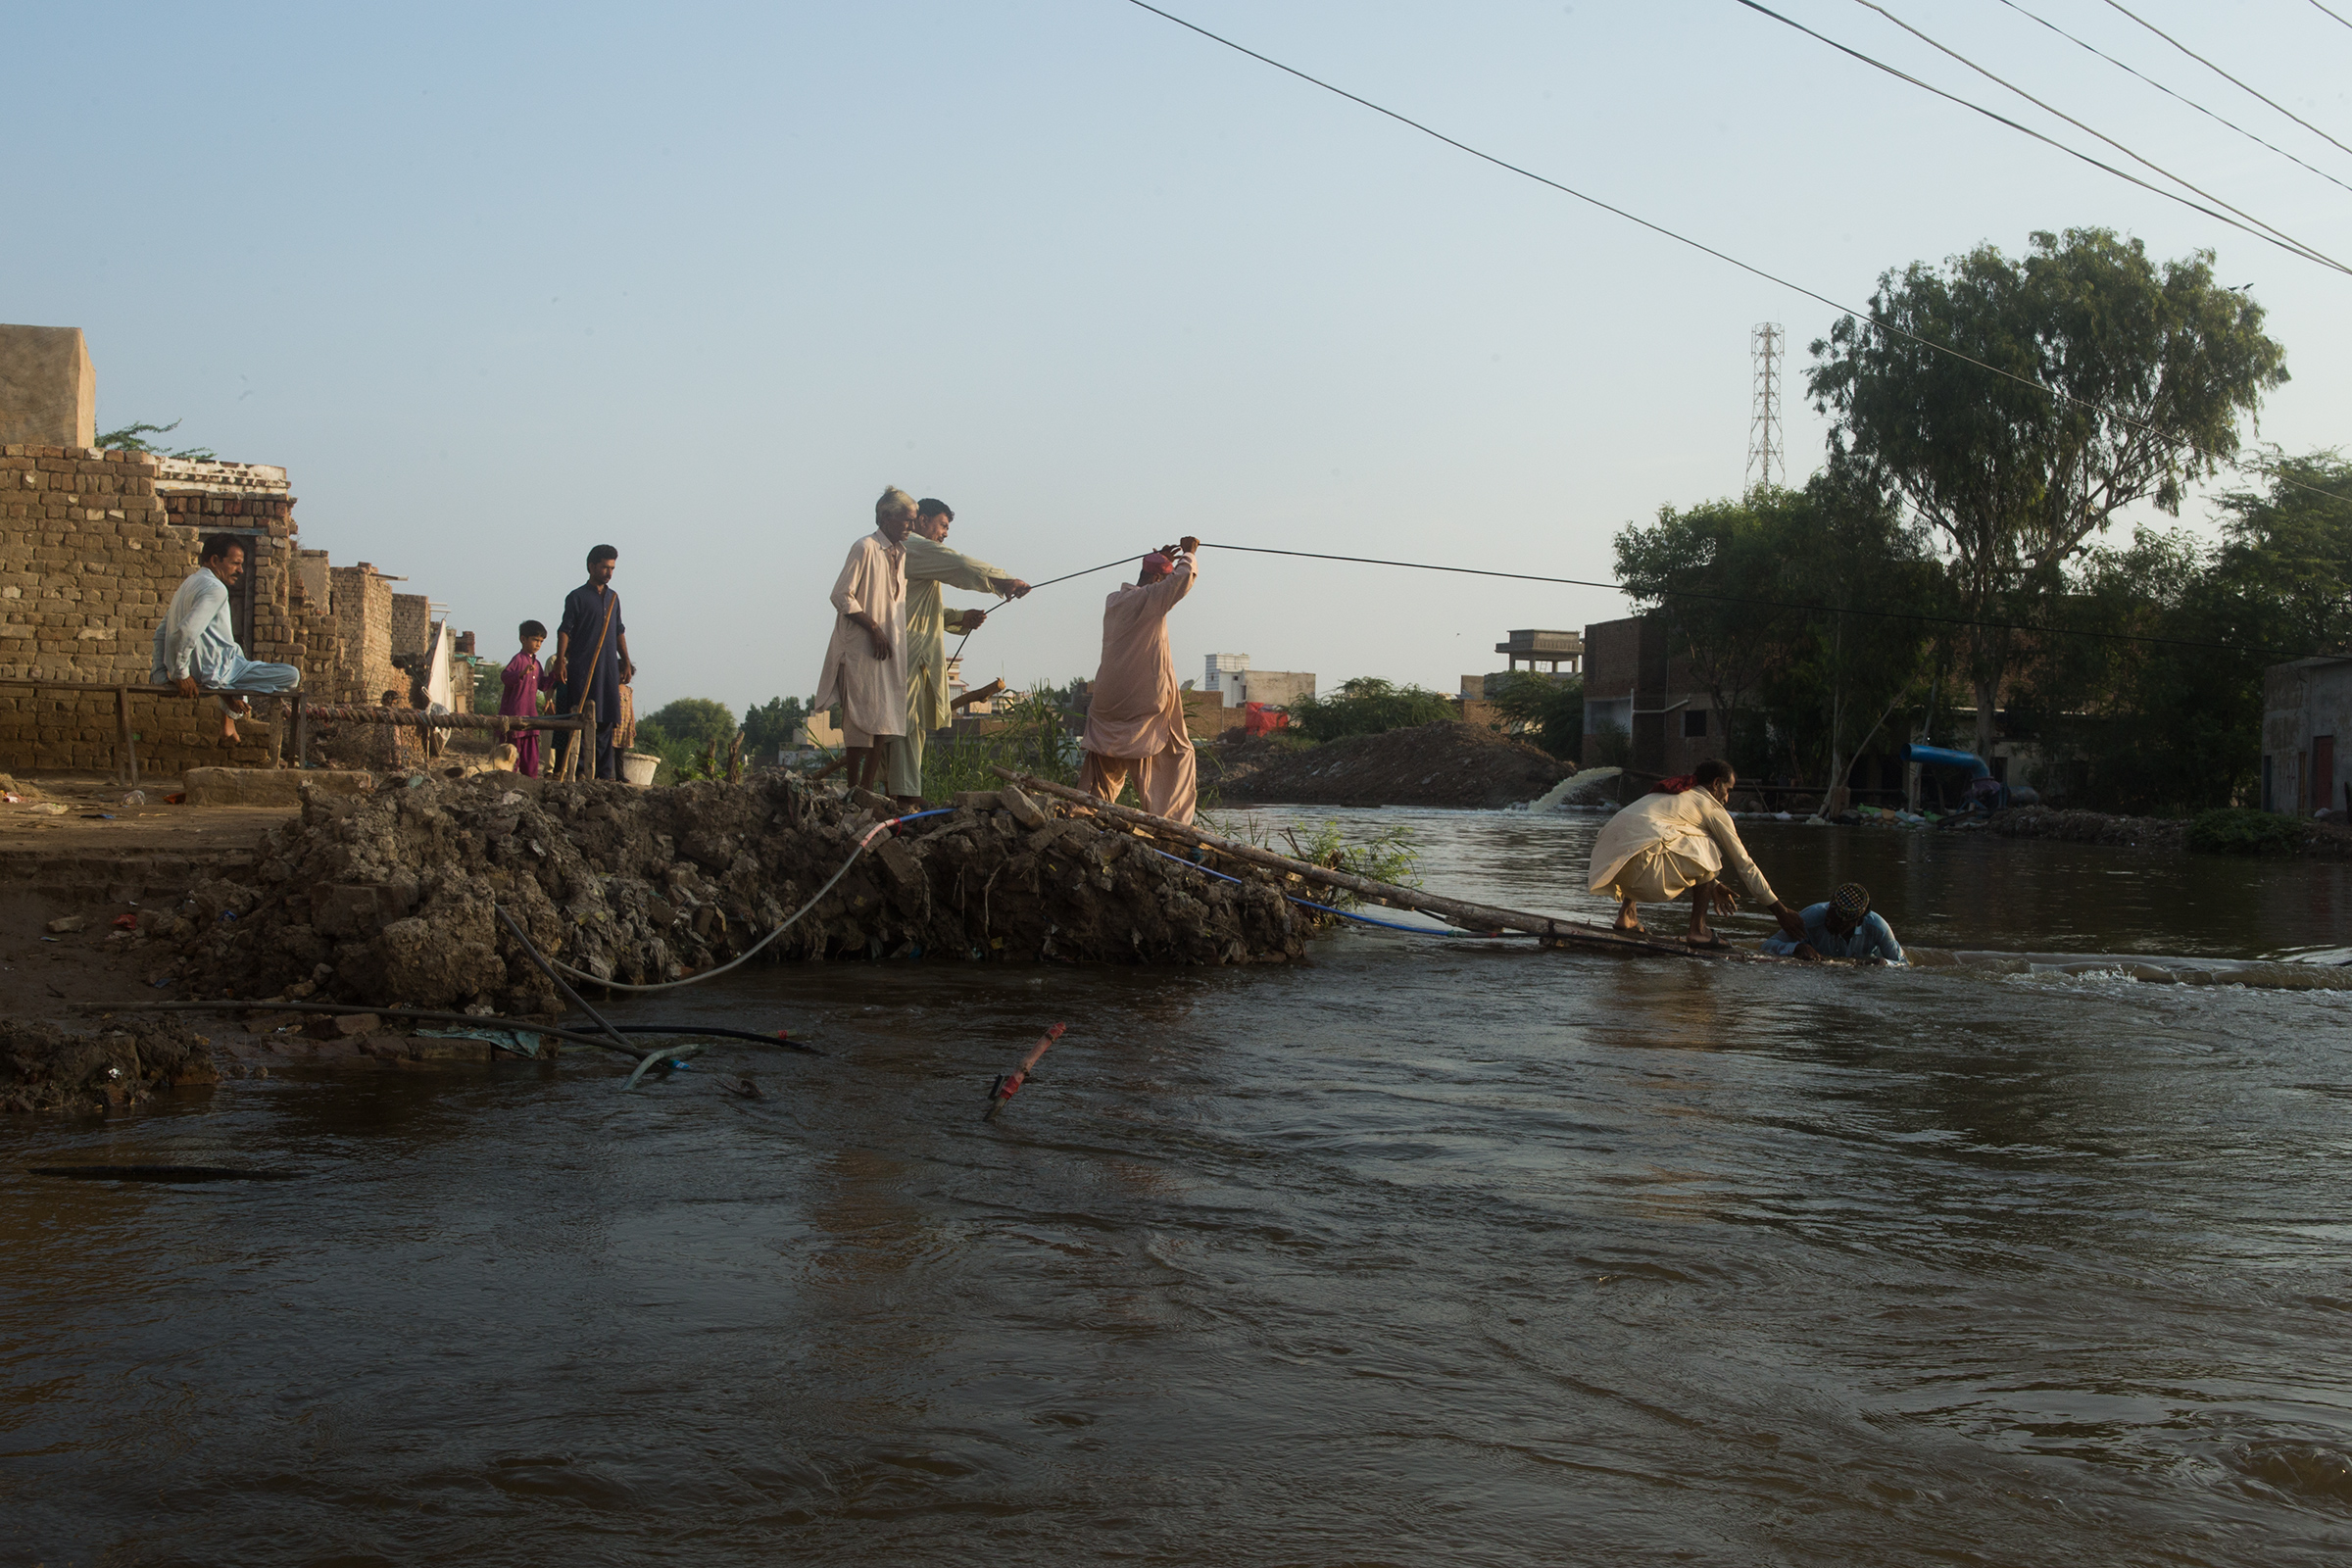 Residents rush to save a man from drowning on an embankment between Hayat Haskheli village and Judo town, September 9.  (Hasan Gondal for TIME)